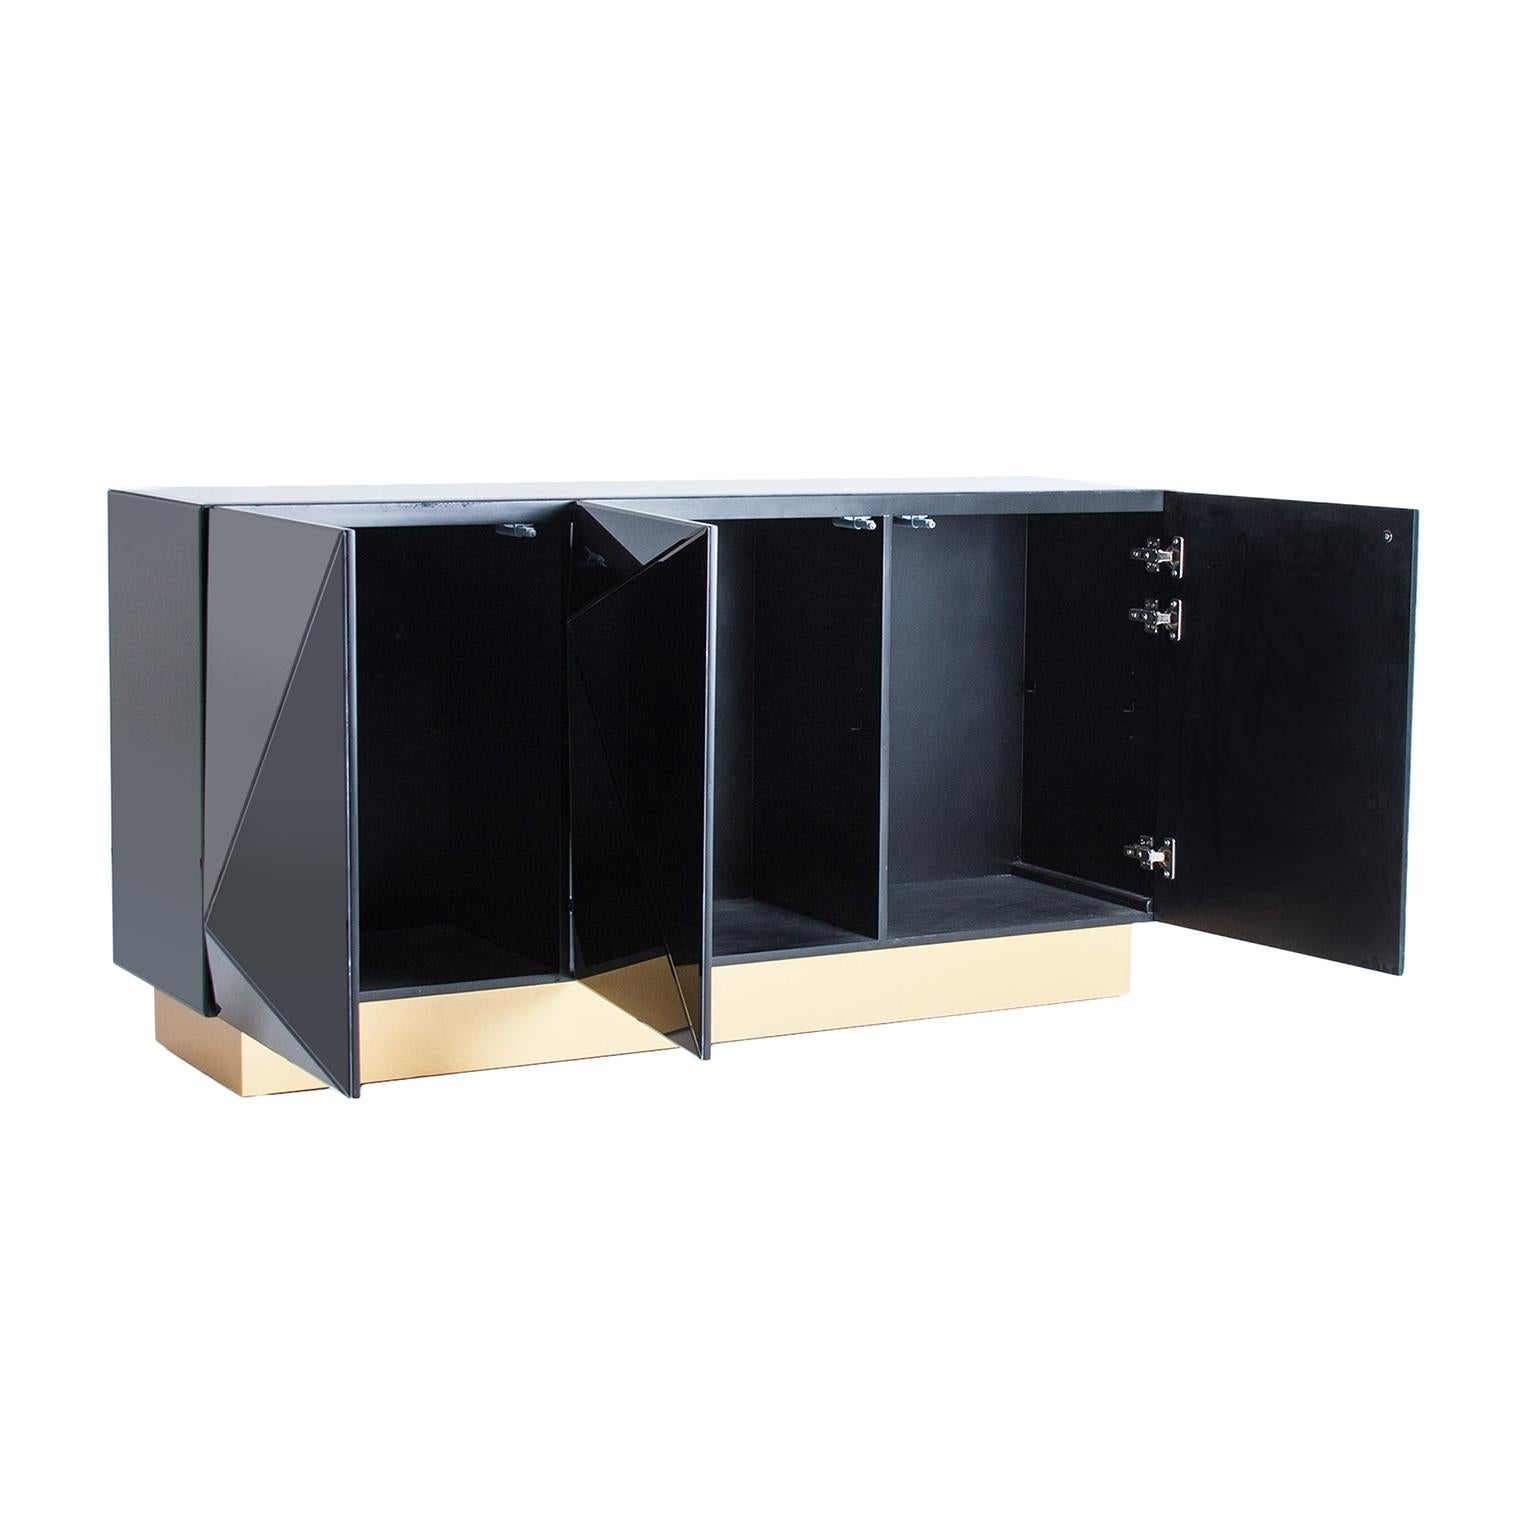 Sparkling and sophisticated black mirrored sideboard with gilded metal feet, three mirrored doors diamond and Brutalist shaped open on shelves.